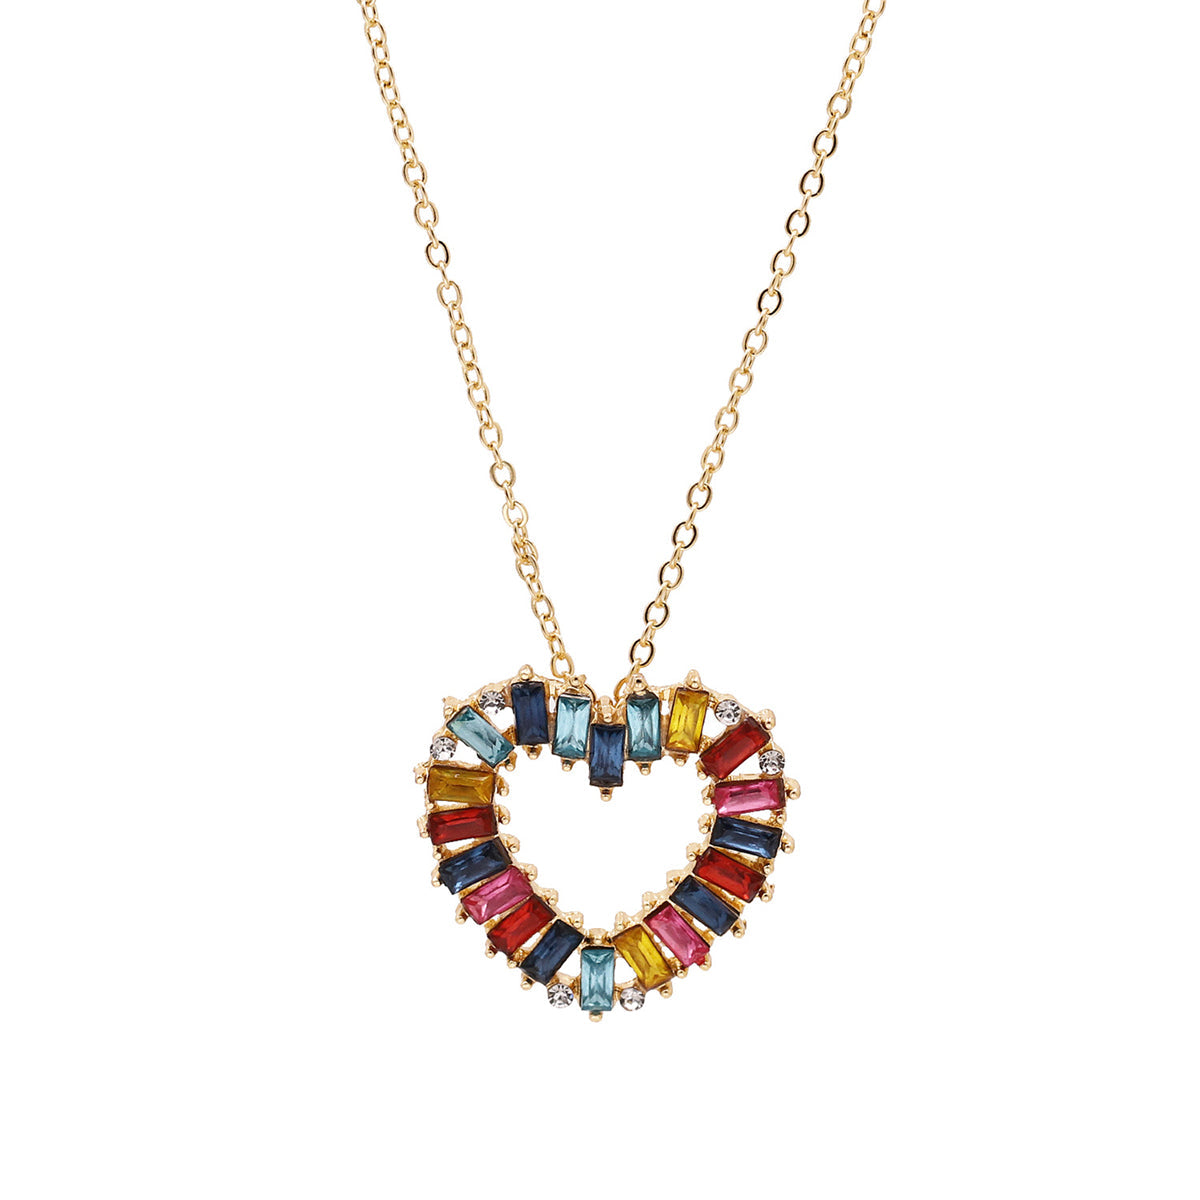 Jewel-Tone Crystal & 18K Gold-Plated Open Heart Pendant Necklace